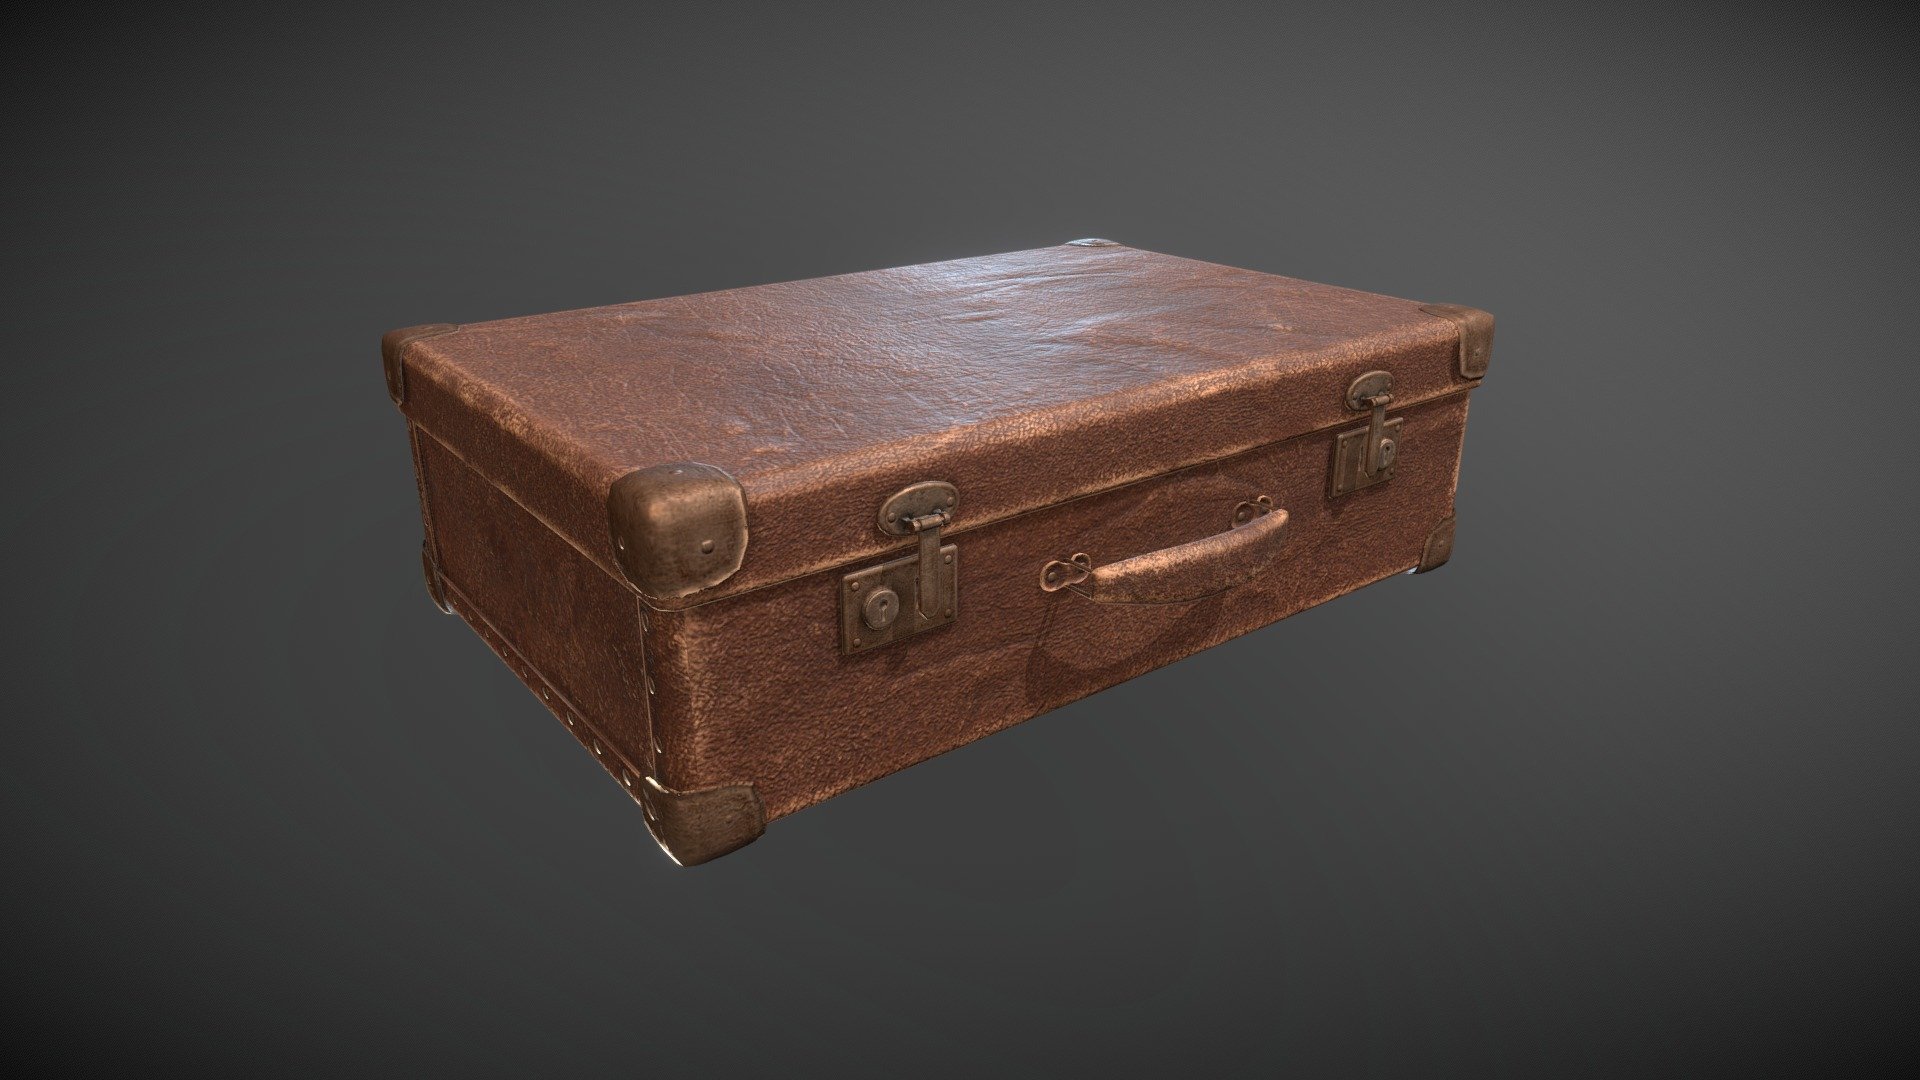 A game ready used suitcase for your 3D environment.

Includes 1K and 2K texture sets (Albedo, Roughness, Metalness, Normal, AO) 3d model